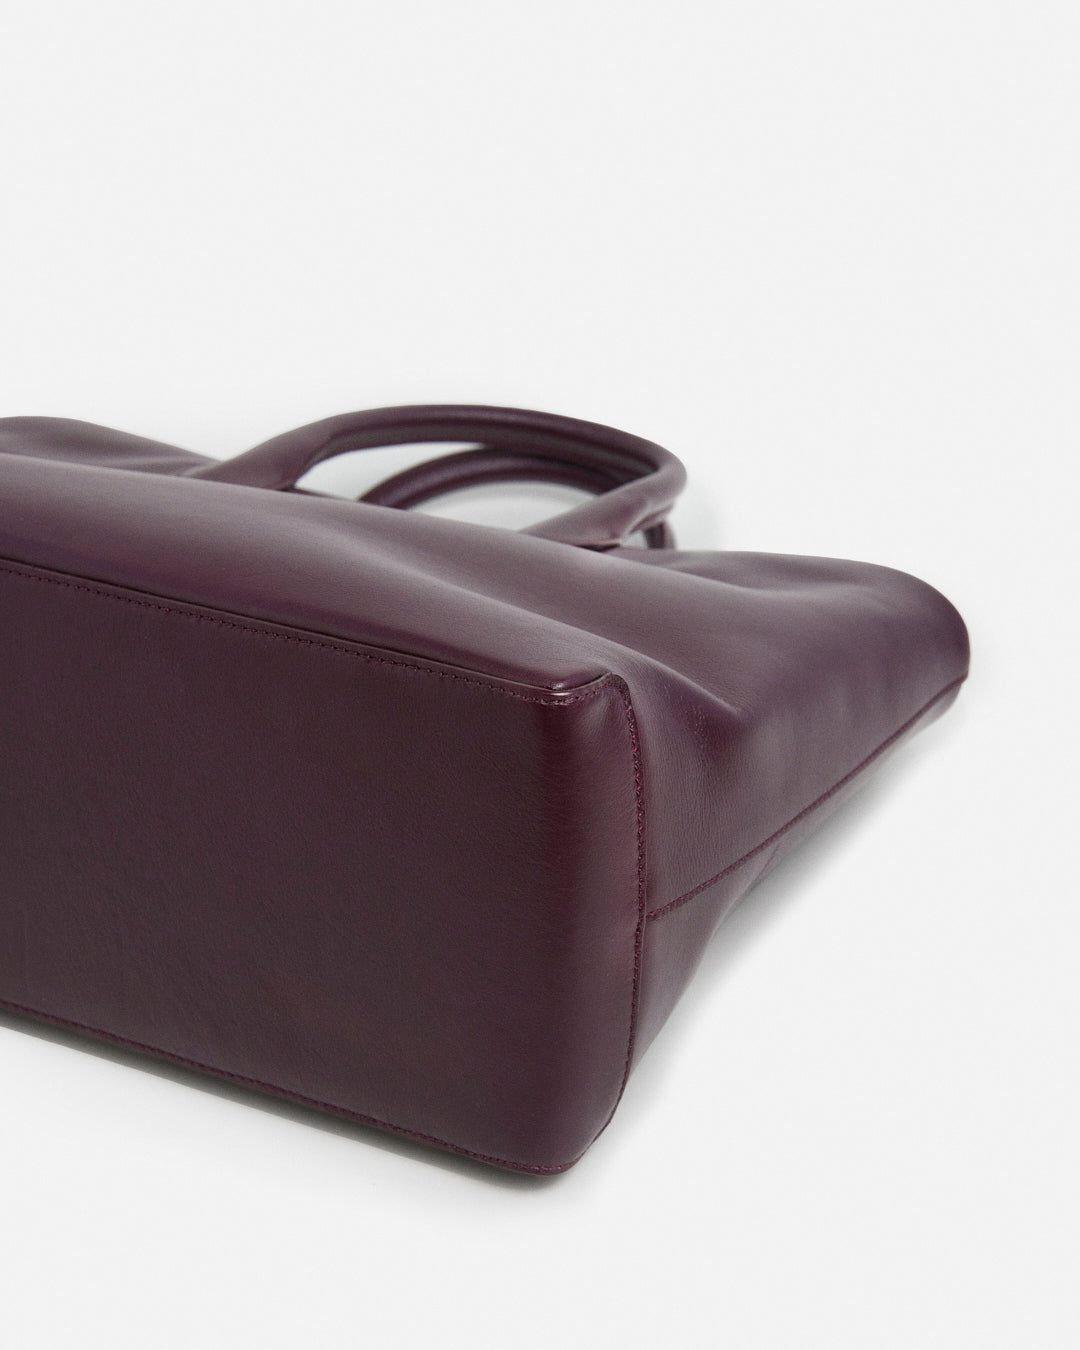 Lola Tote Leather Patent Burgundy